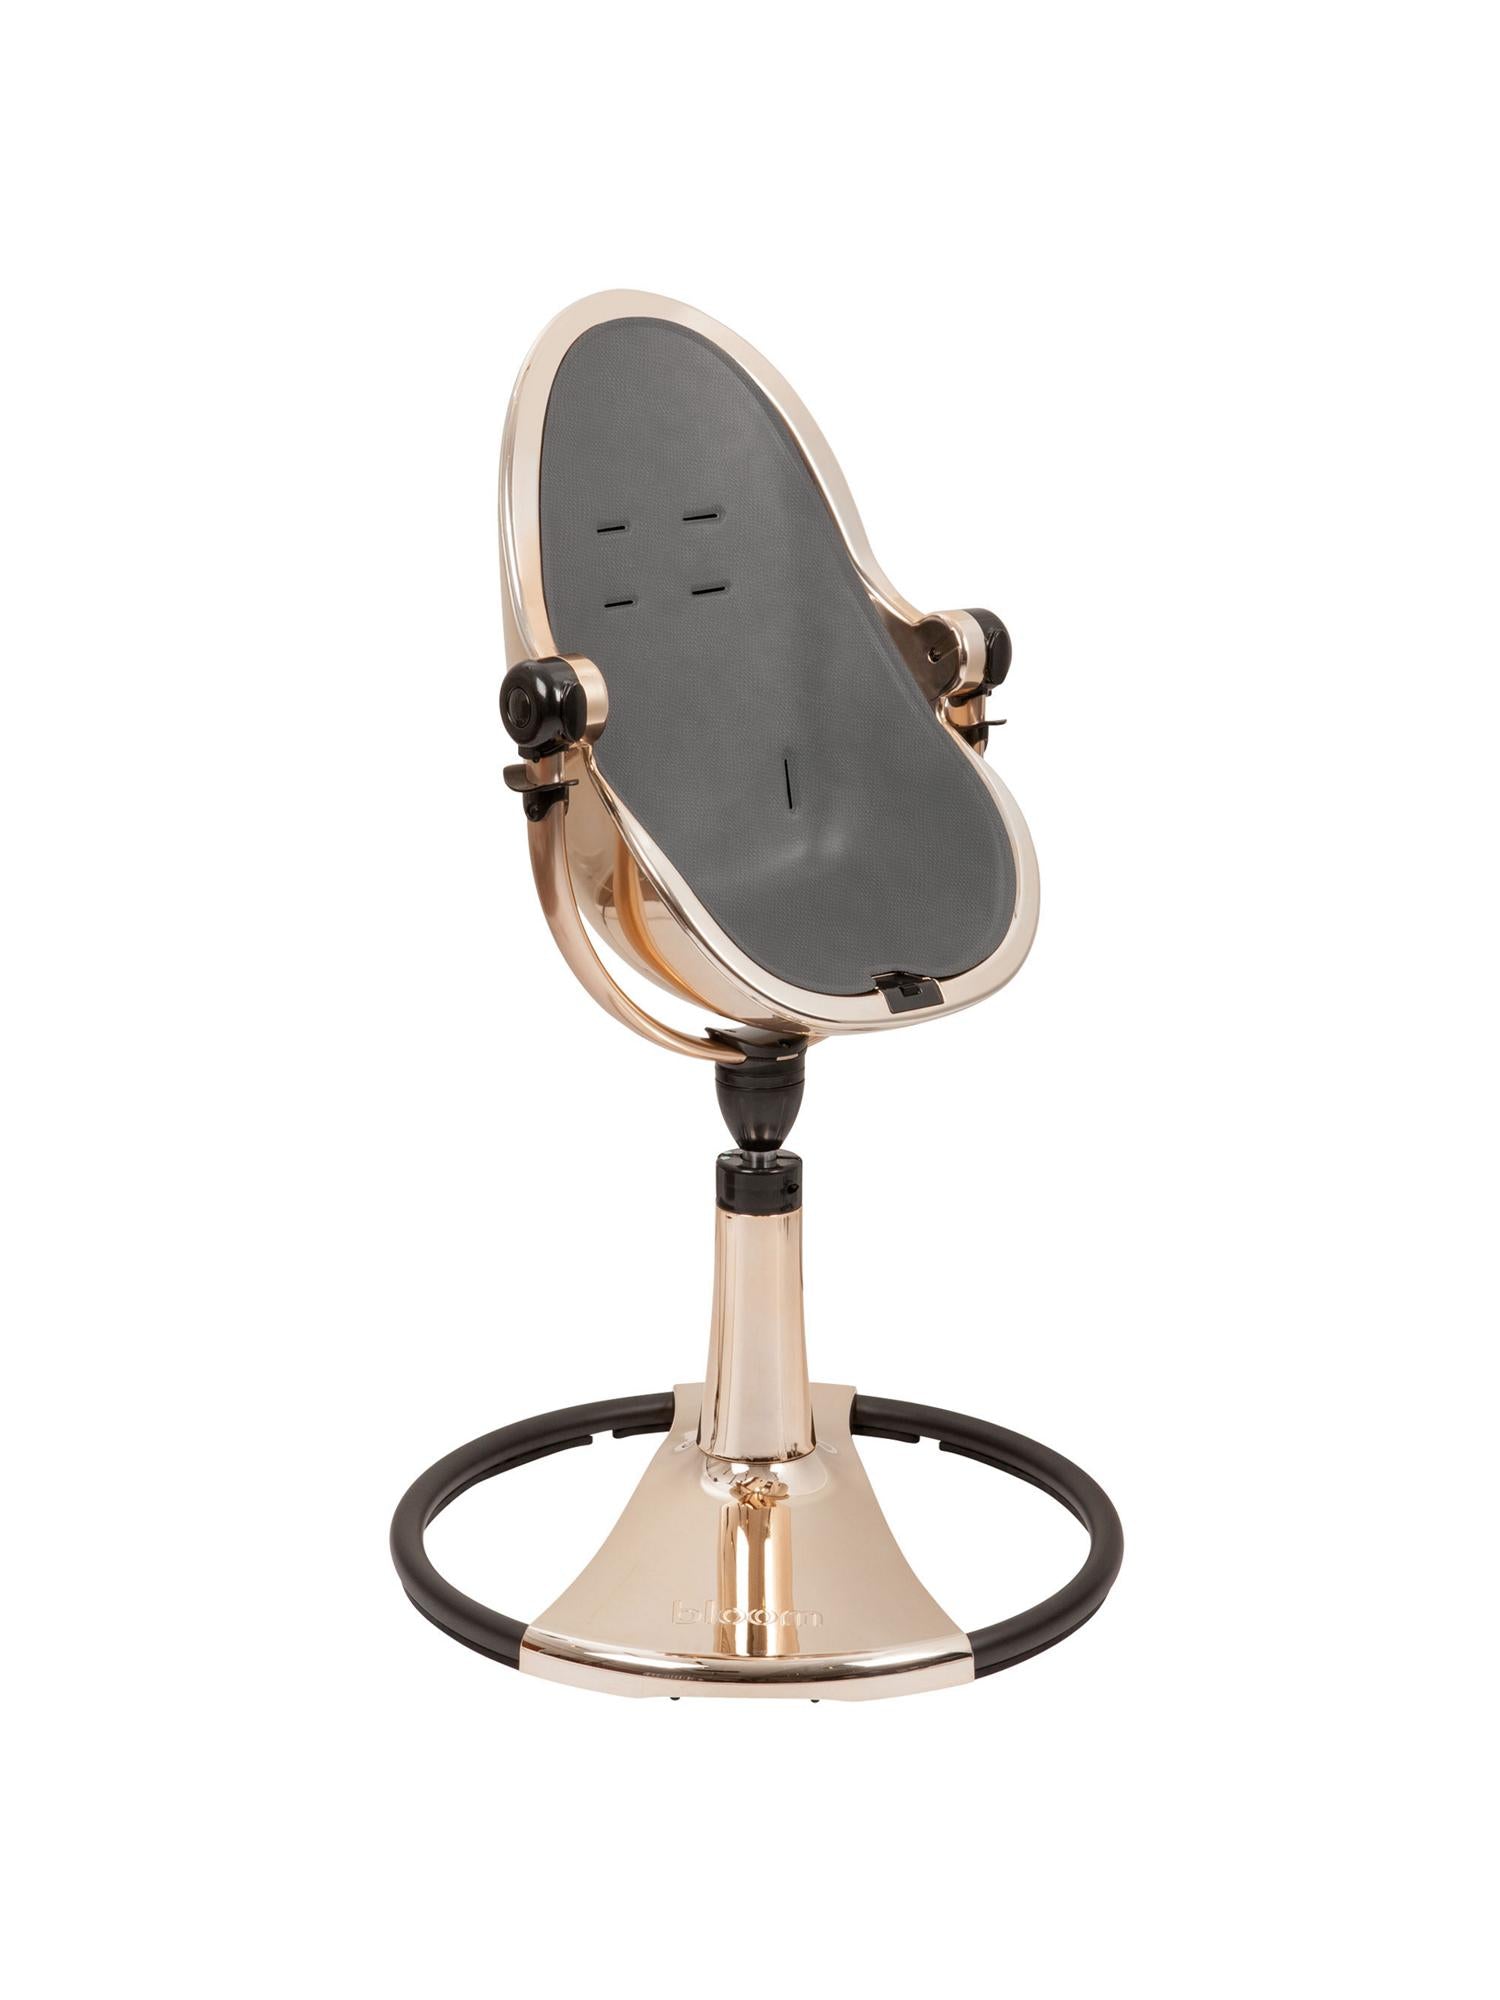 Bloom Fresco Highchair - Special Edition Rose Gold